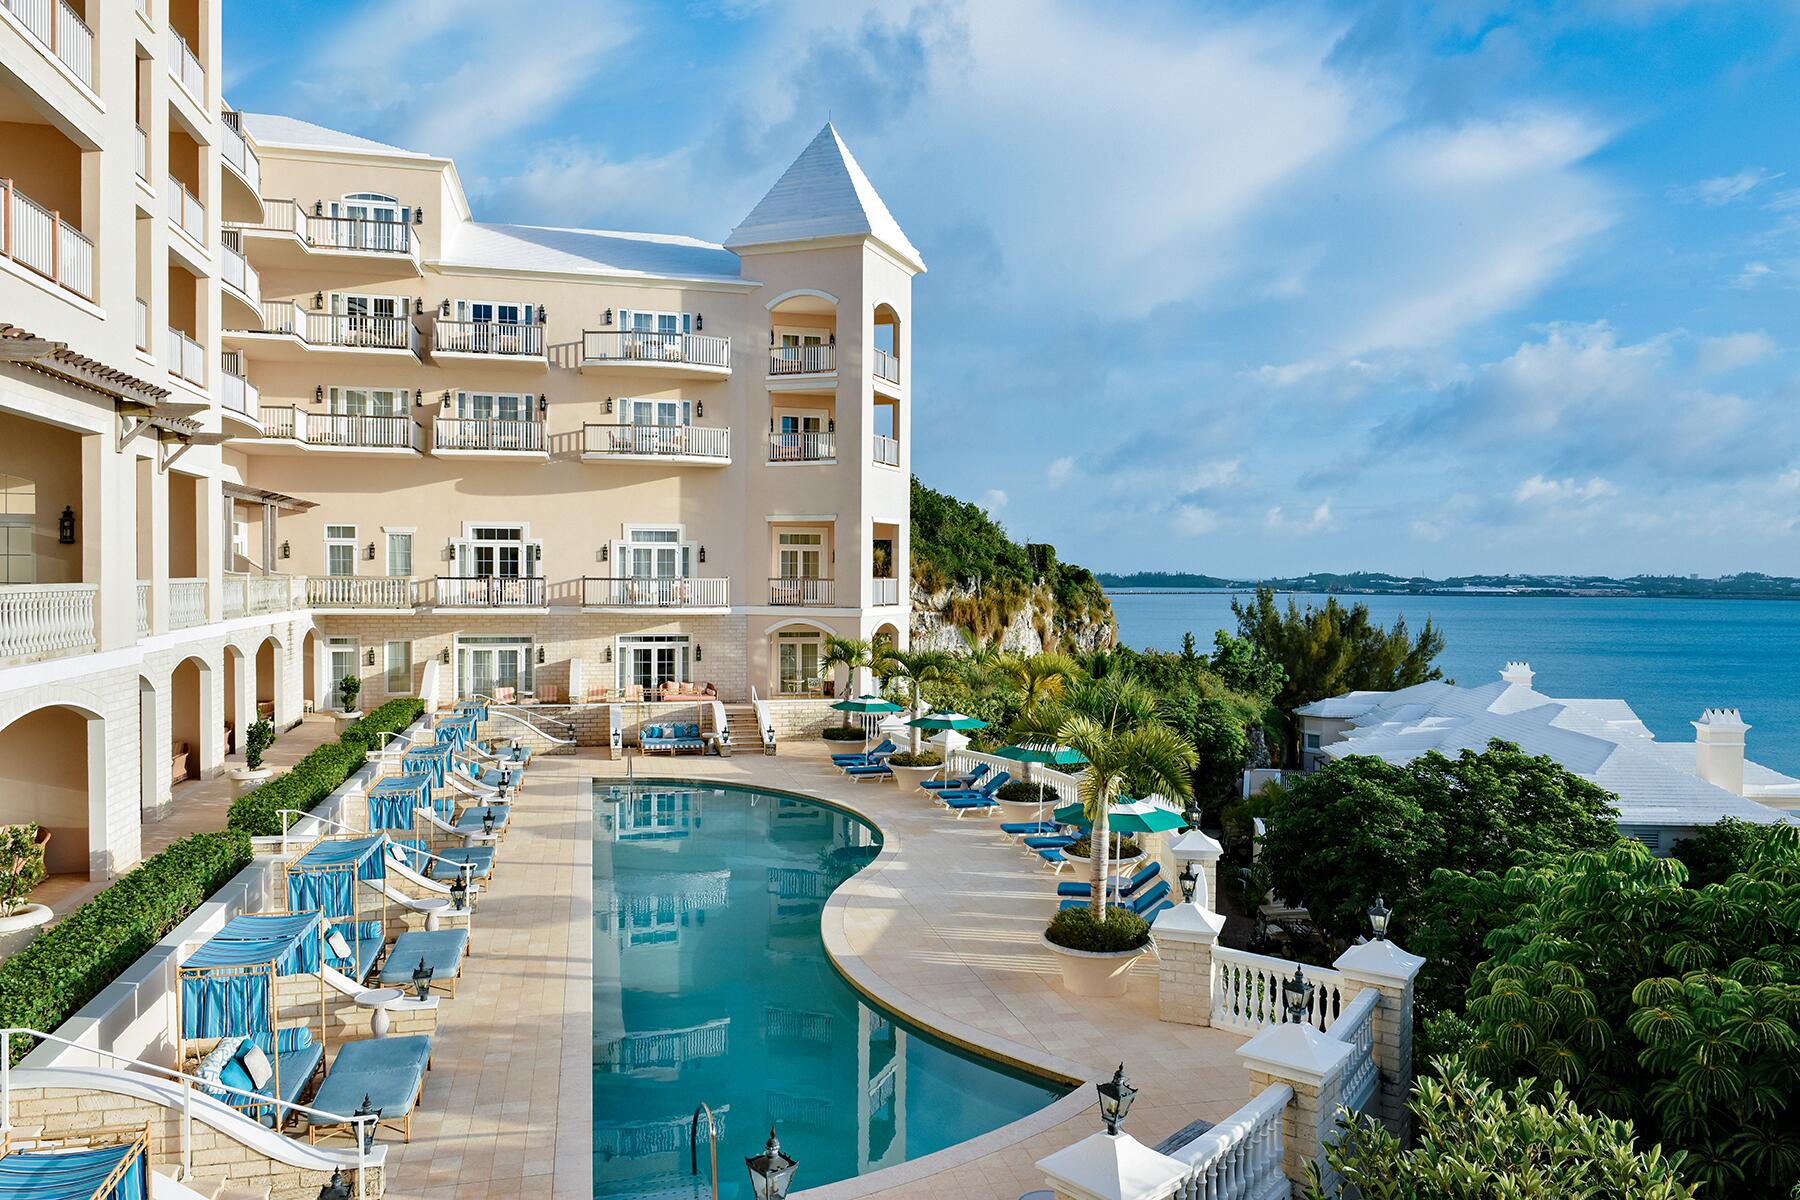 Where to Stay in Bermuda